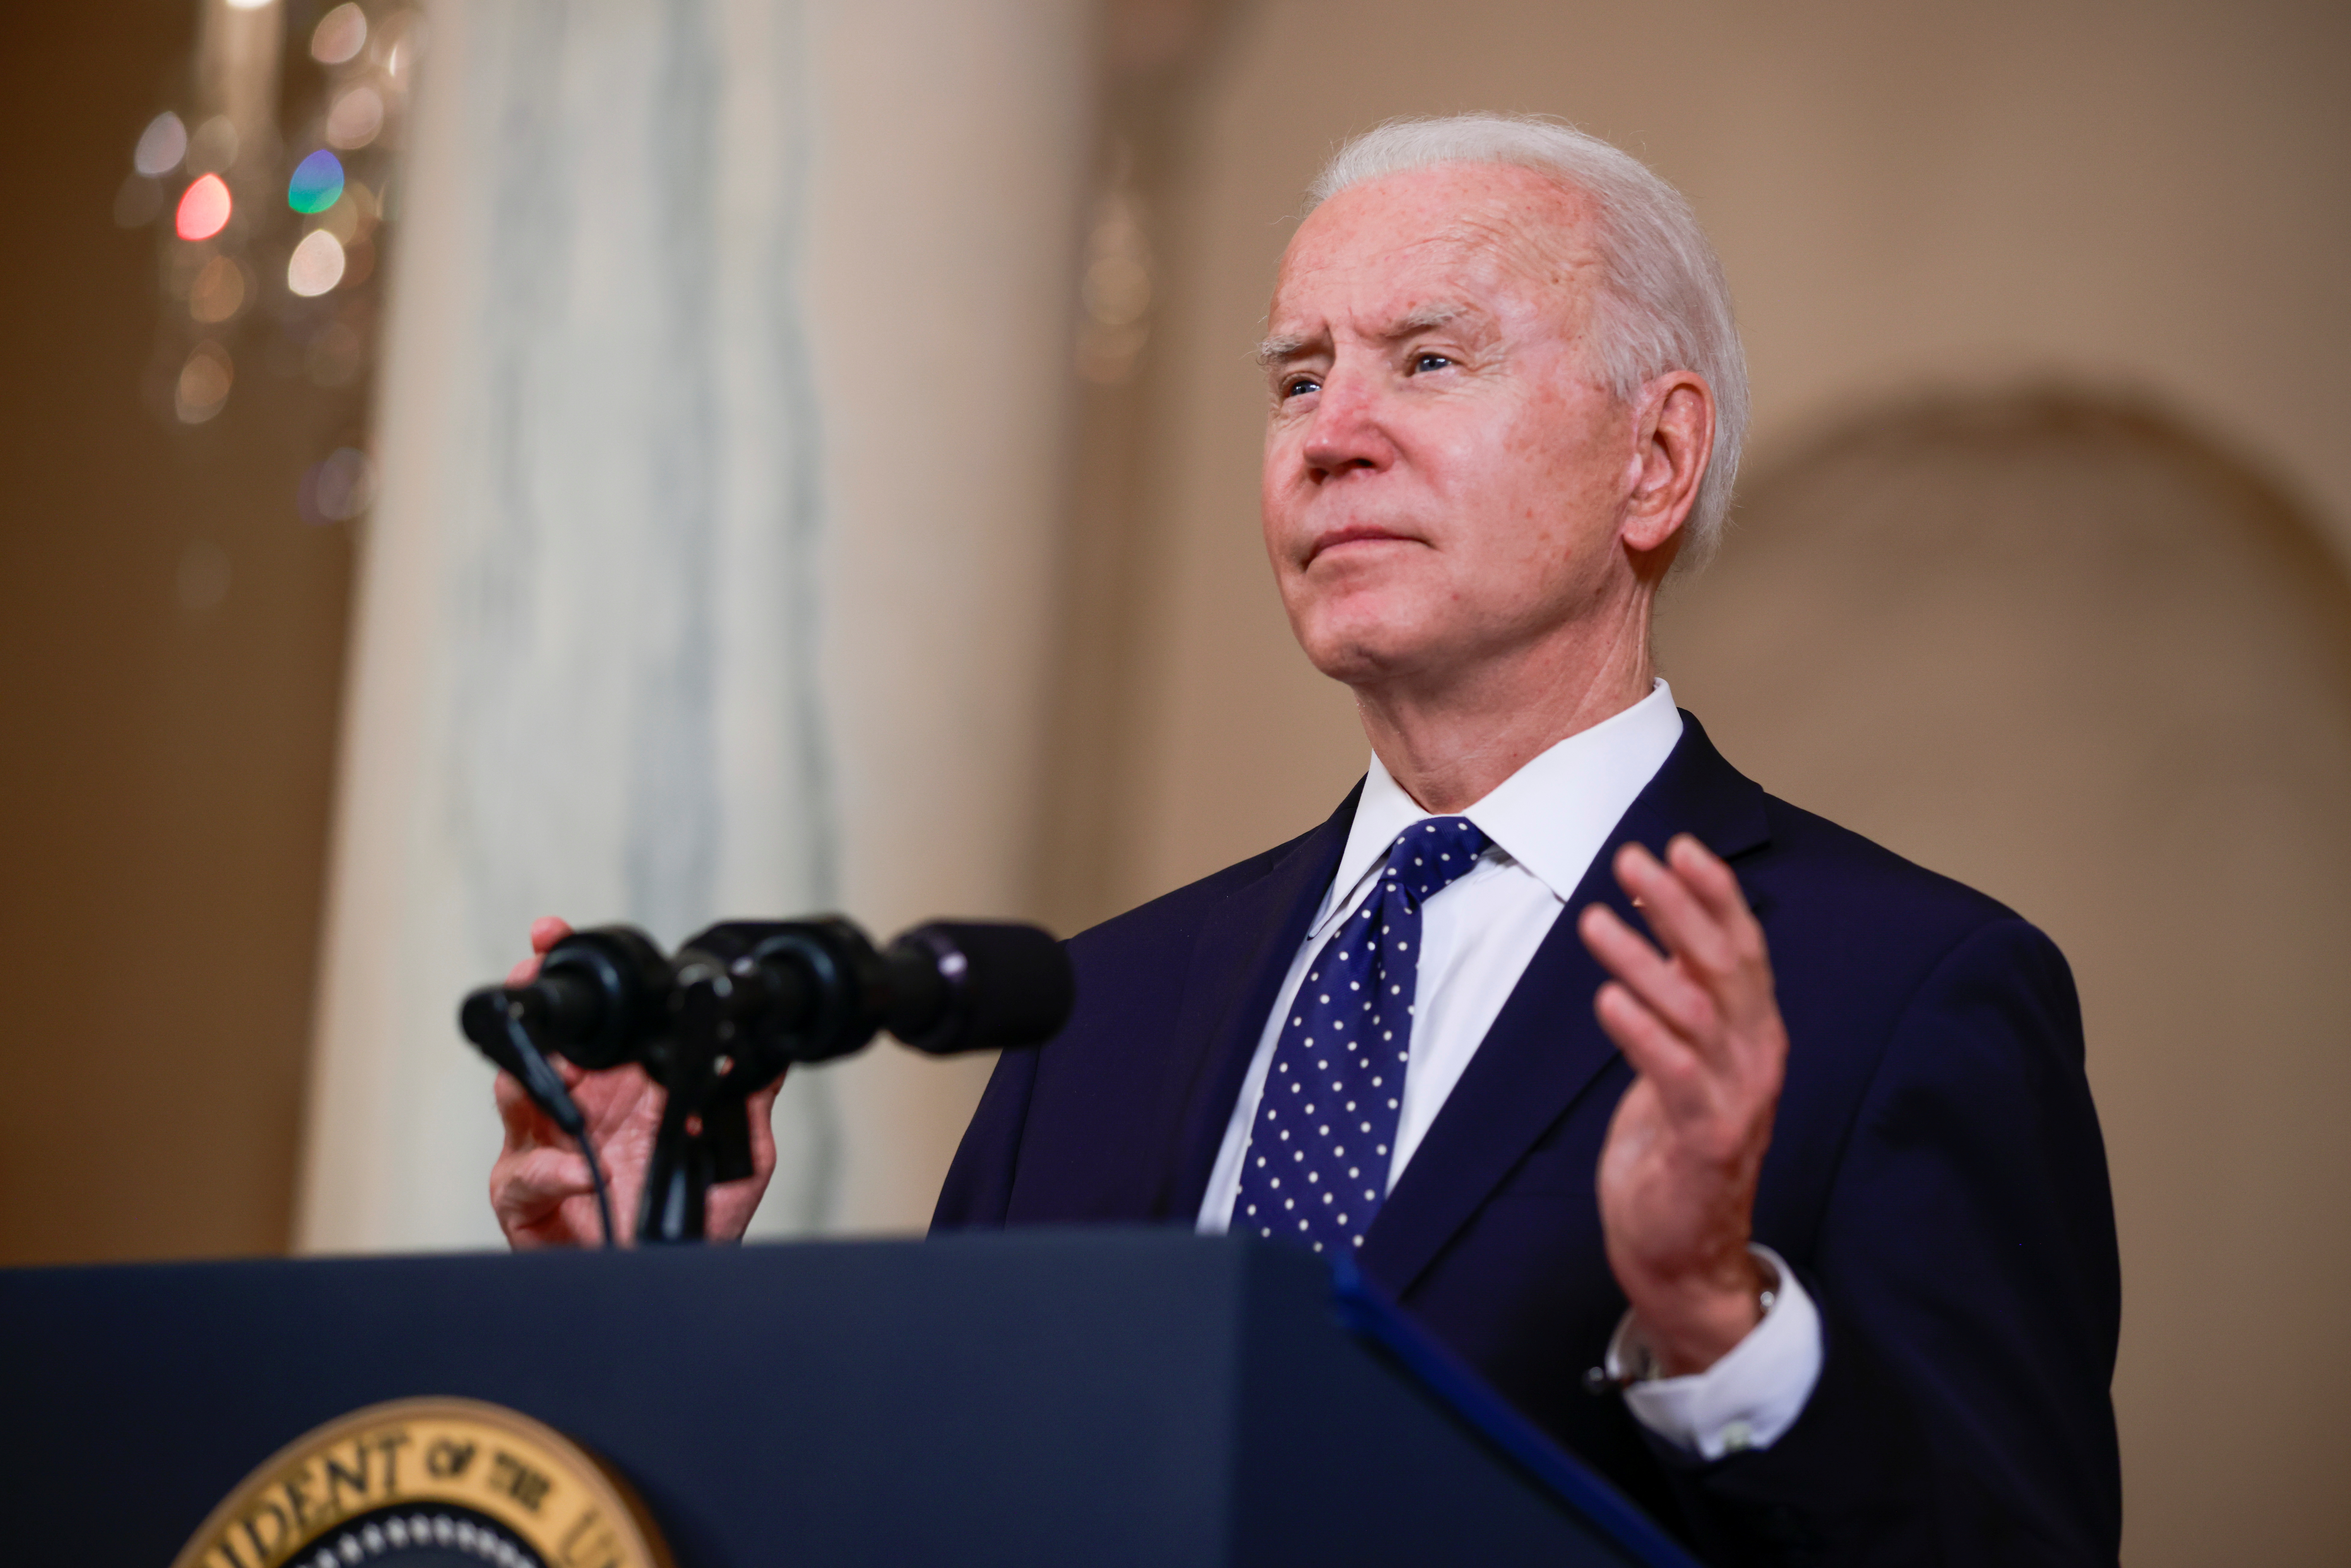 U.S. President Biden and Vice President Harris  speak after guilty verdicts reached in trial of former Minneapolis police officer Chauvin at the White House in Washington